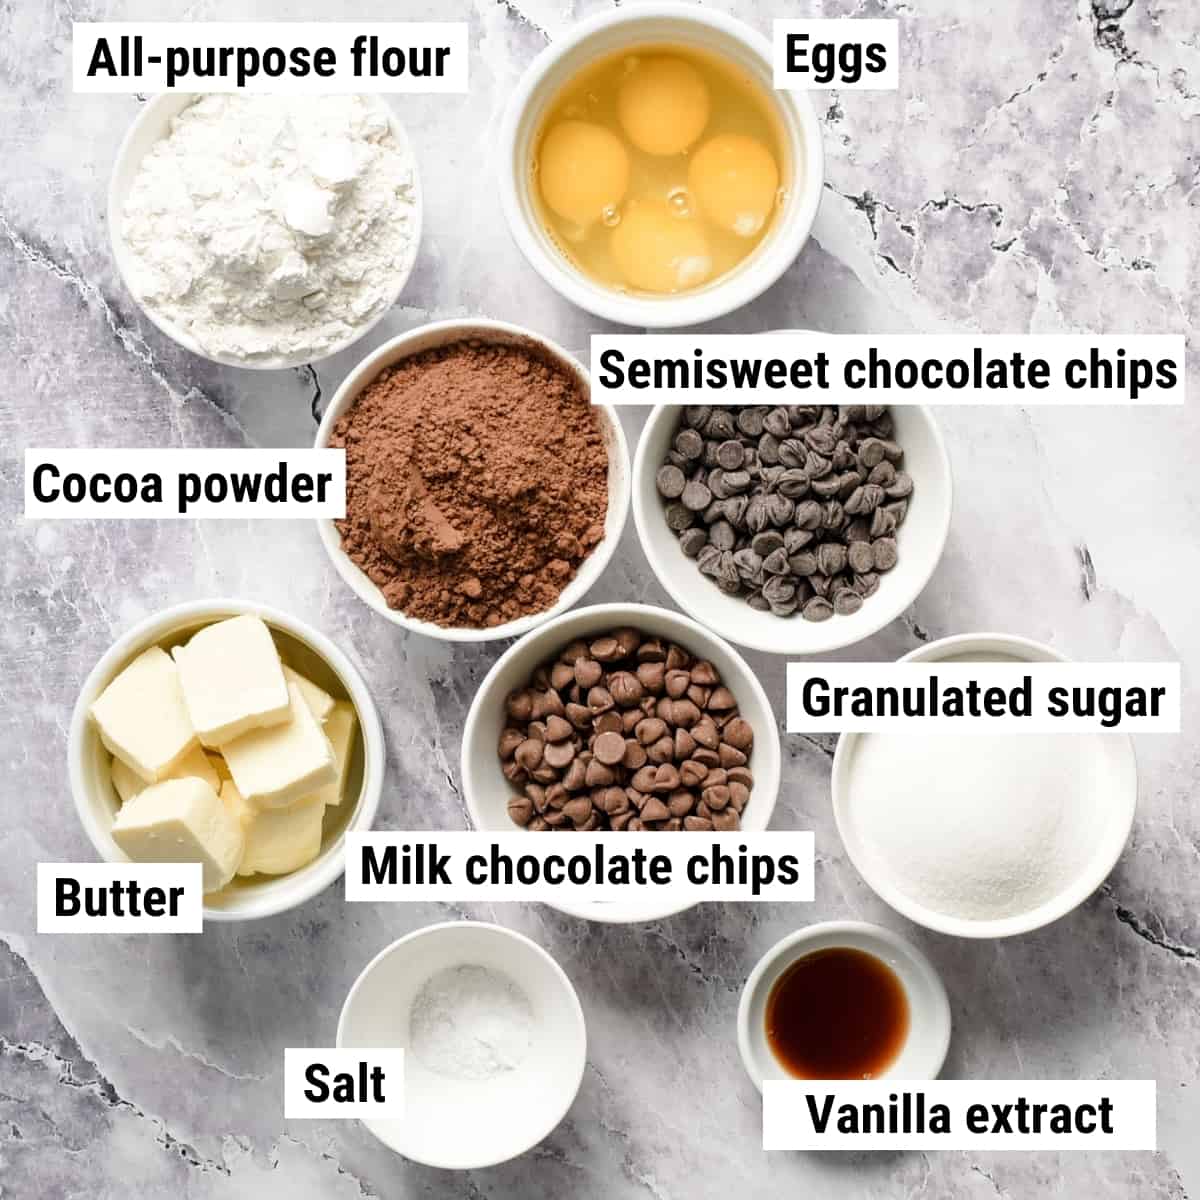 The ingredients to make triple chocolate brownies spread out on a table.